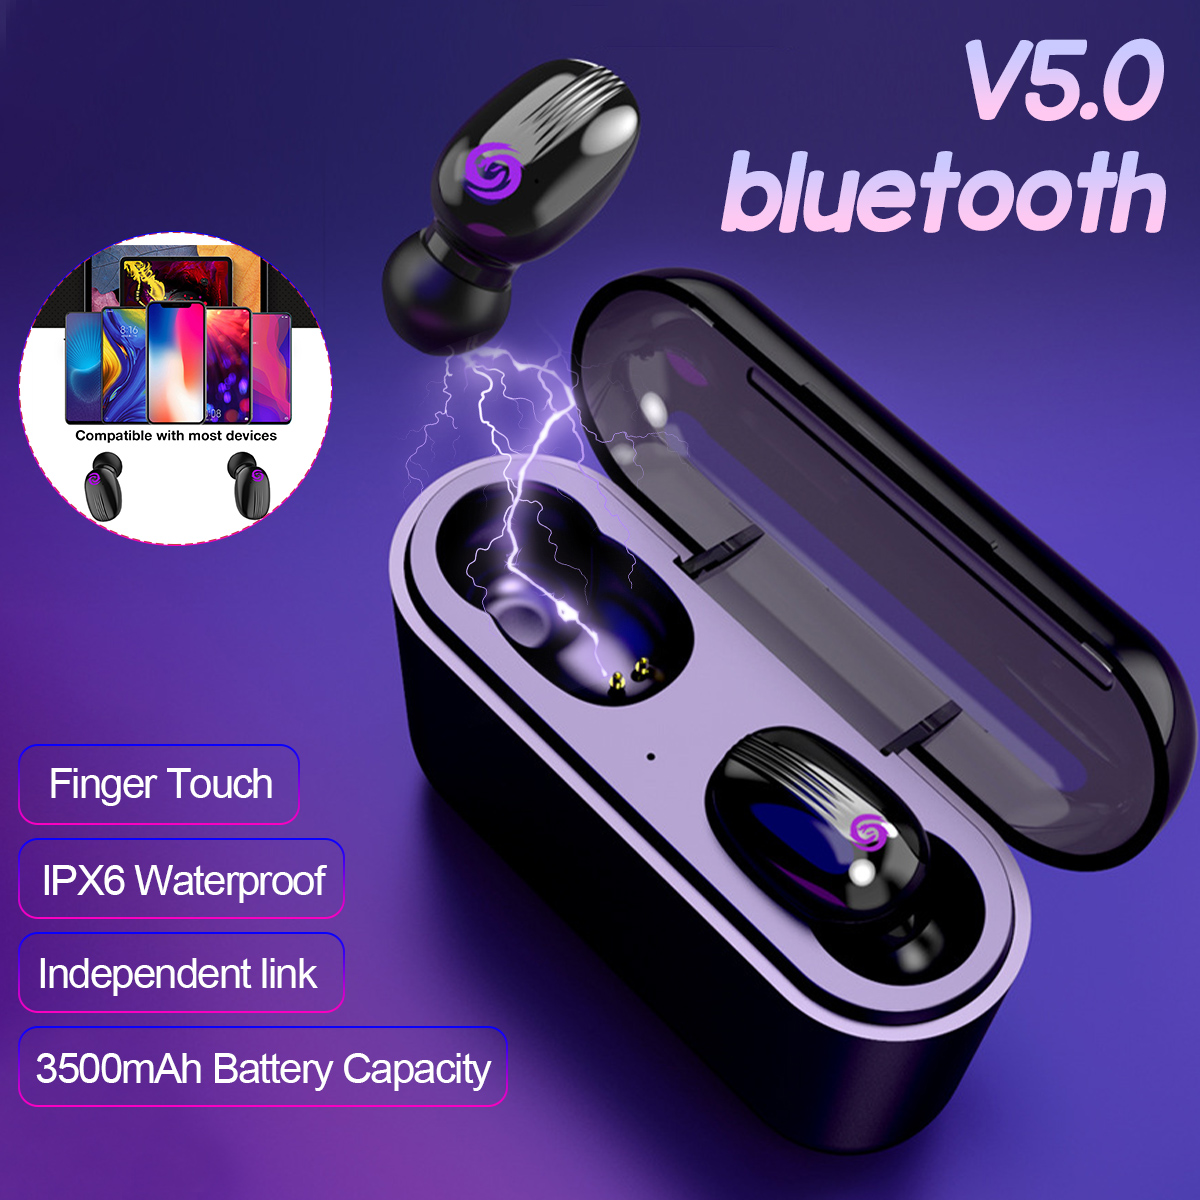 X2-Invisible-Wireless-Stereo-Earbuds-bluetooth-50-Smart-Touch-IPX6-Waterproof-Binaural-TWS-Earphone--1518358-1